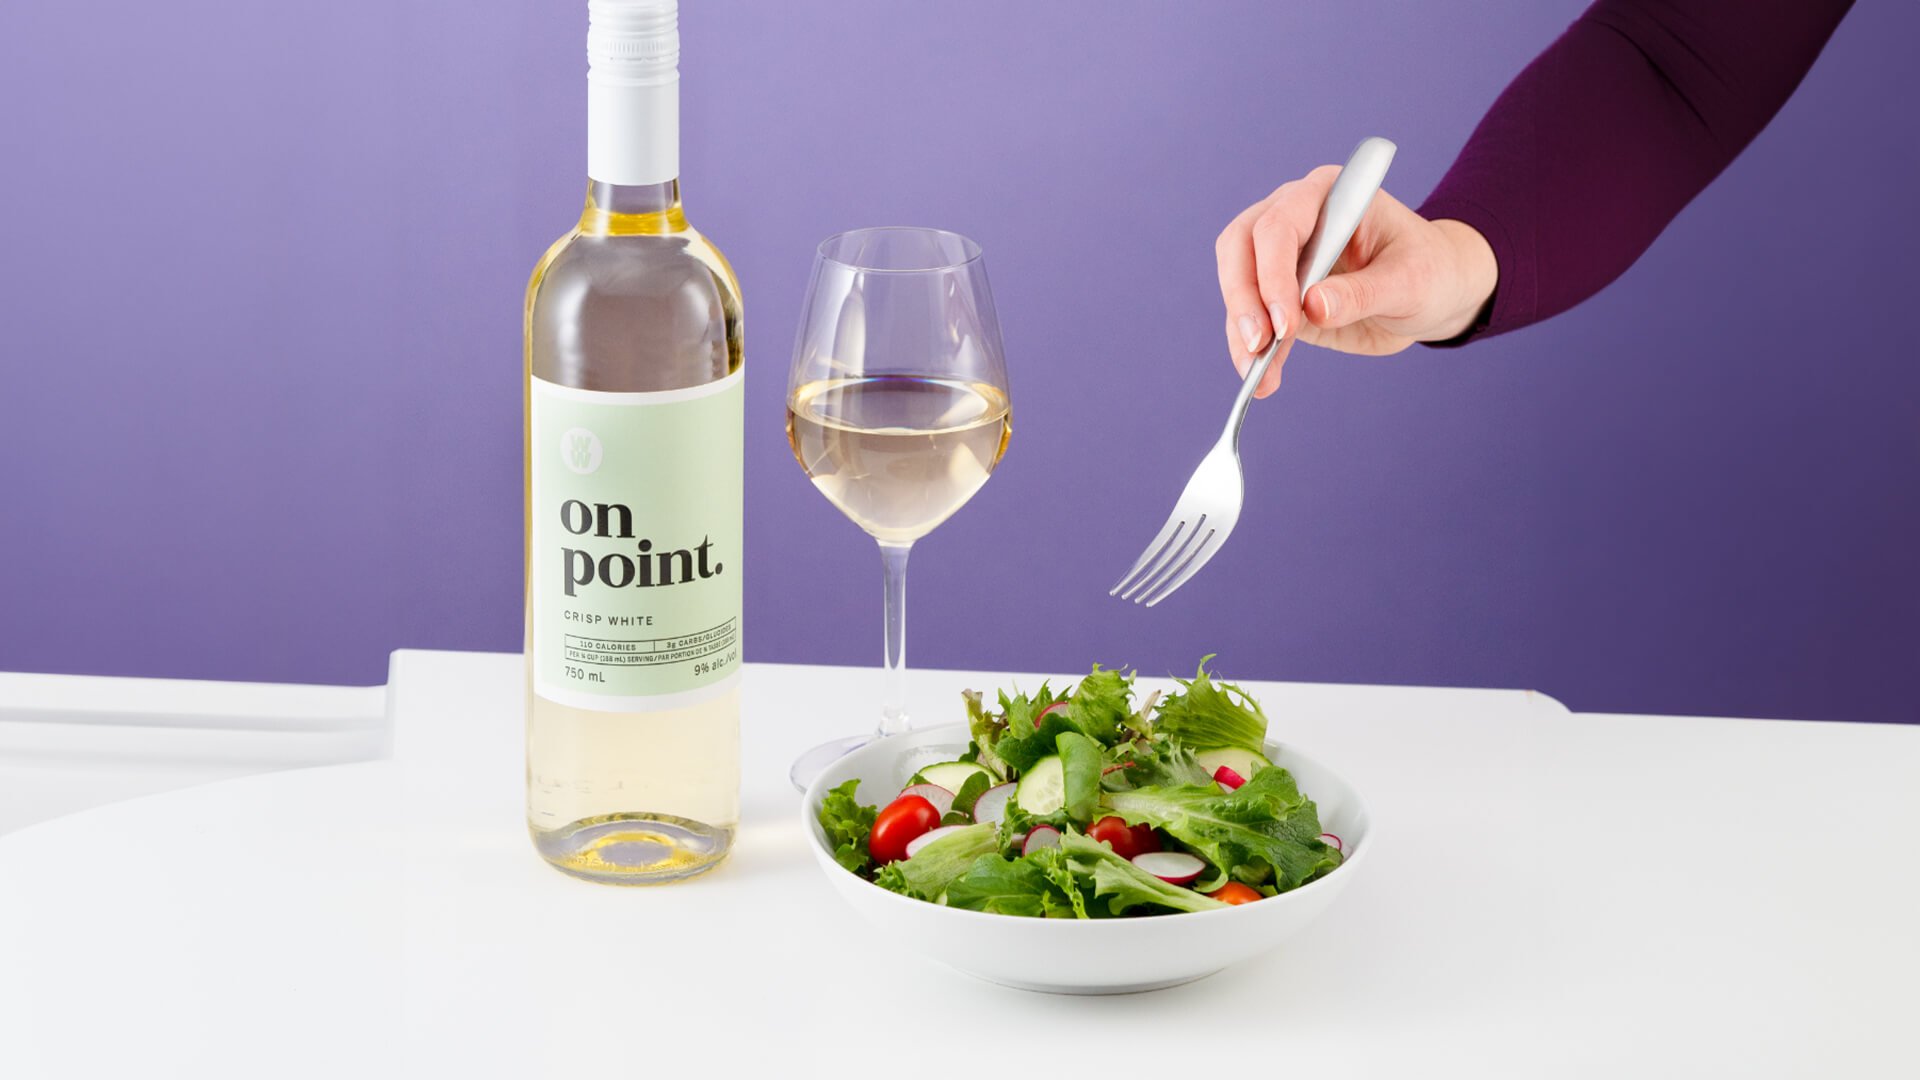 On Point rose wine paired with a garden salad.  